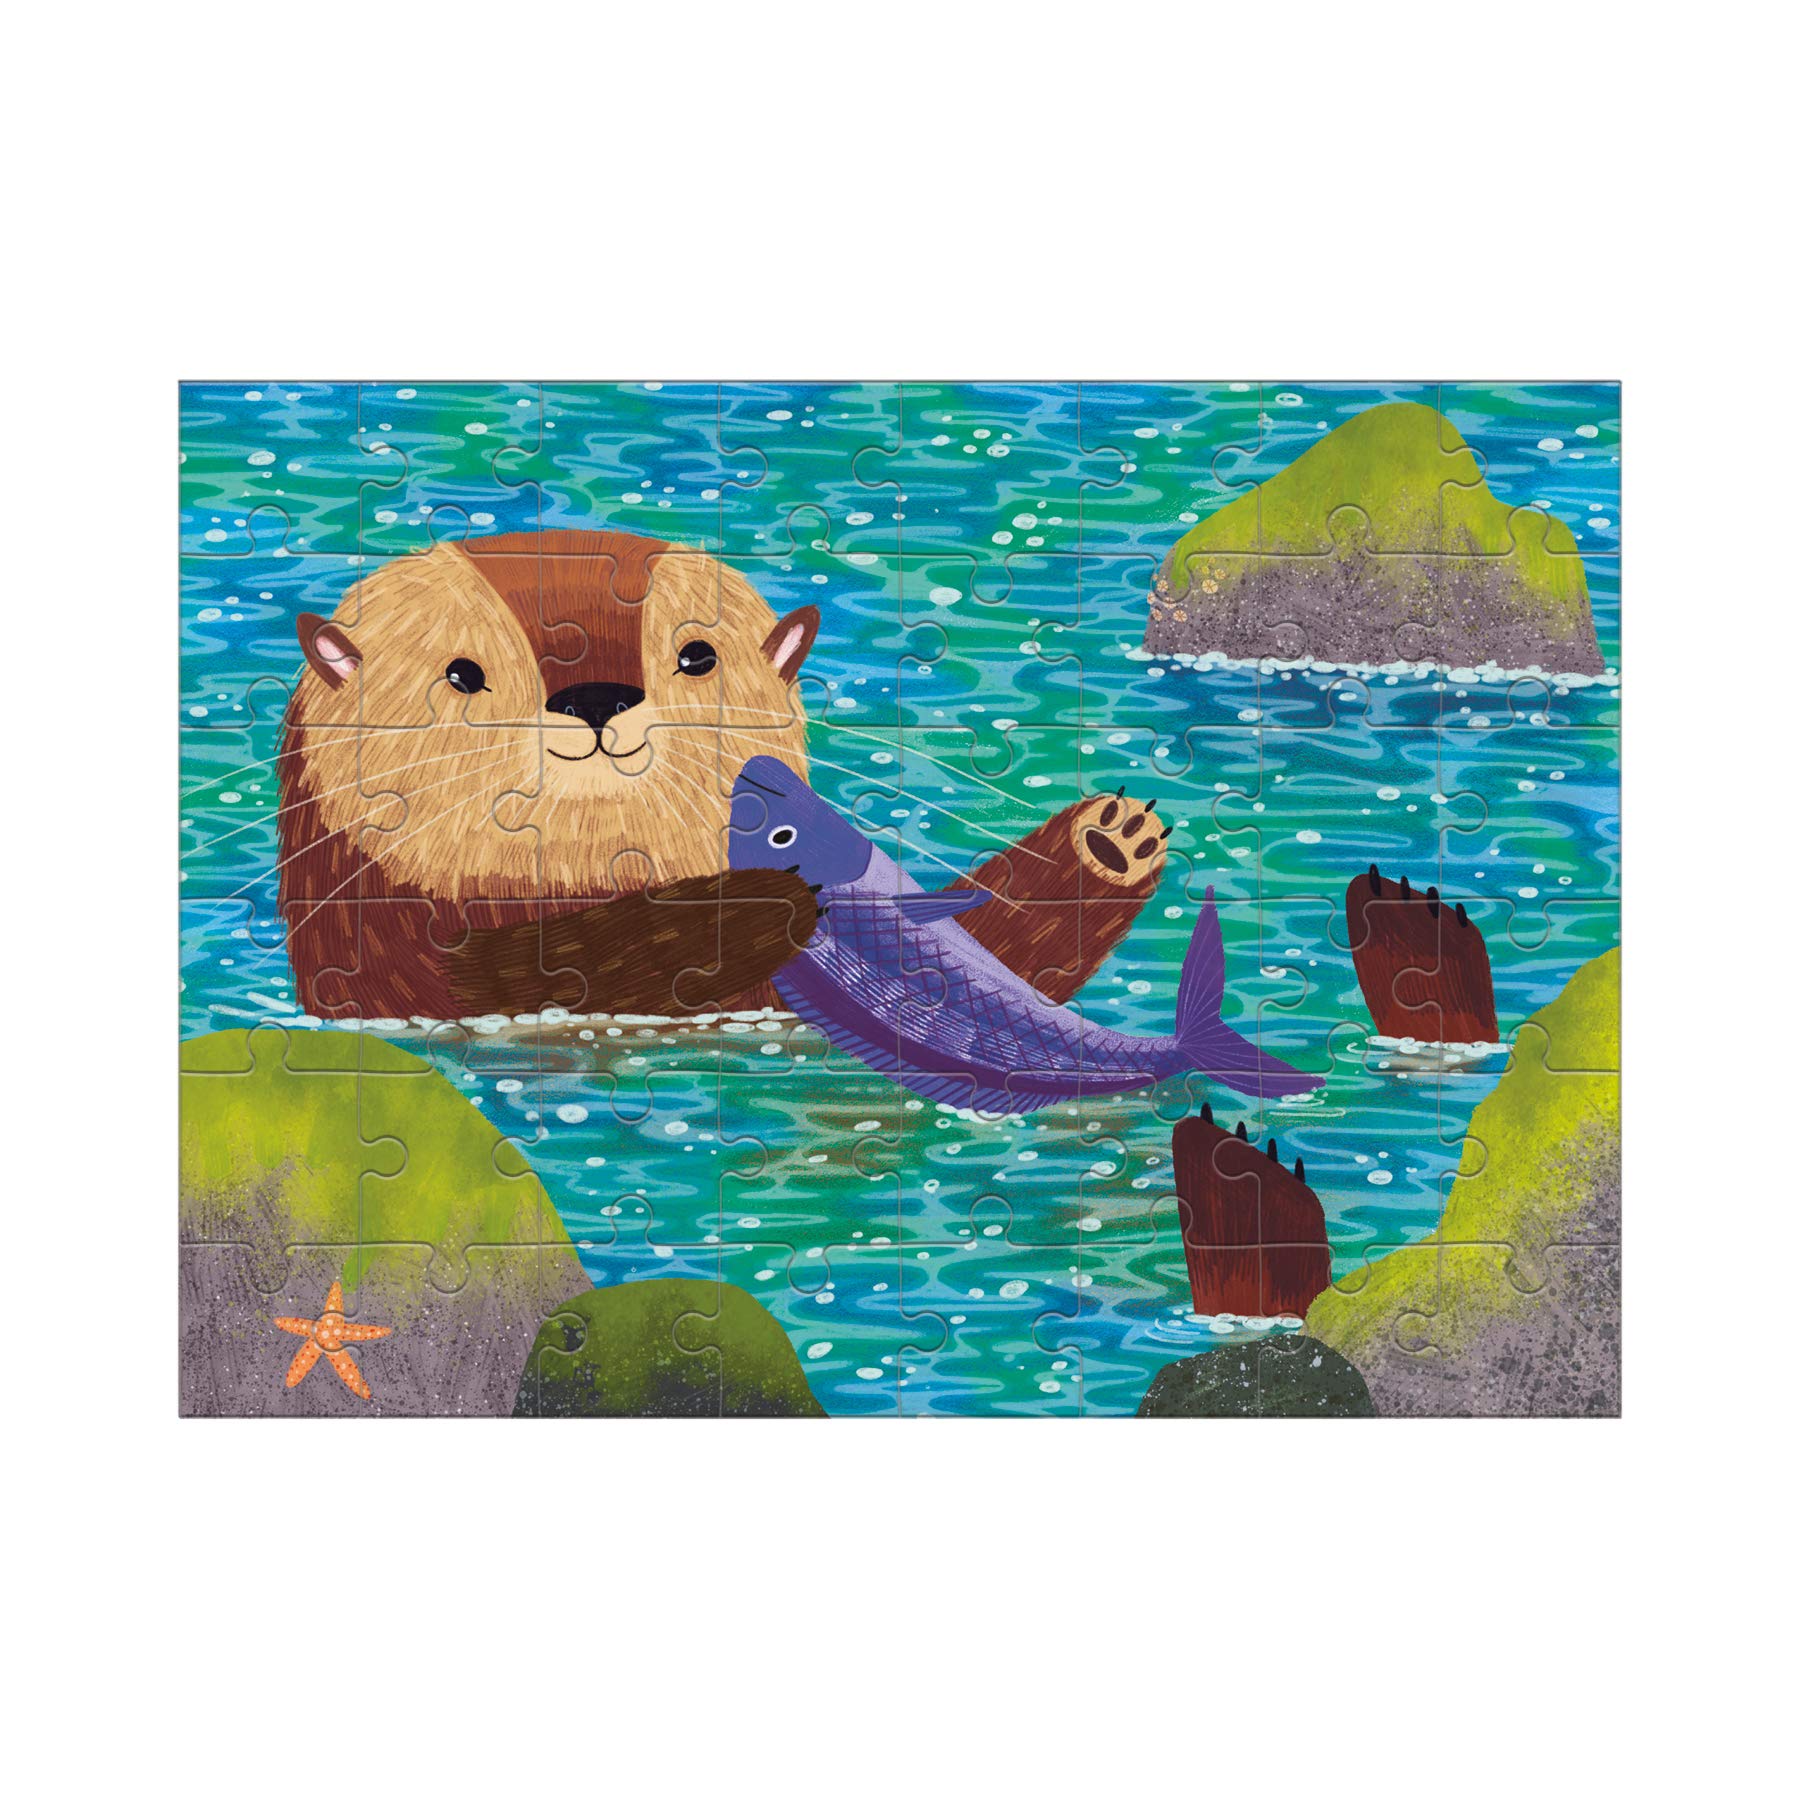 Mudpuppy Sea Otter Mini Puzzle, 48 Pieces, 8” x 5.75” – Perfect Family Puzzle for Ages 4+ – Features a Colorful Illustration of a Sea Otter, Informational Insert Included